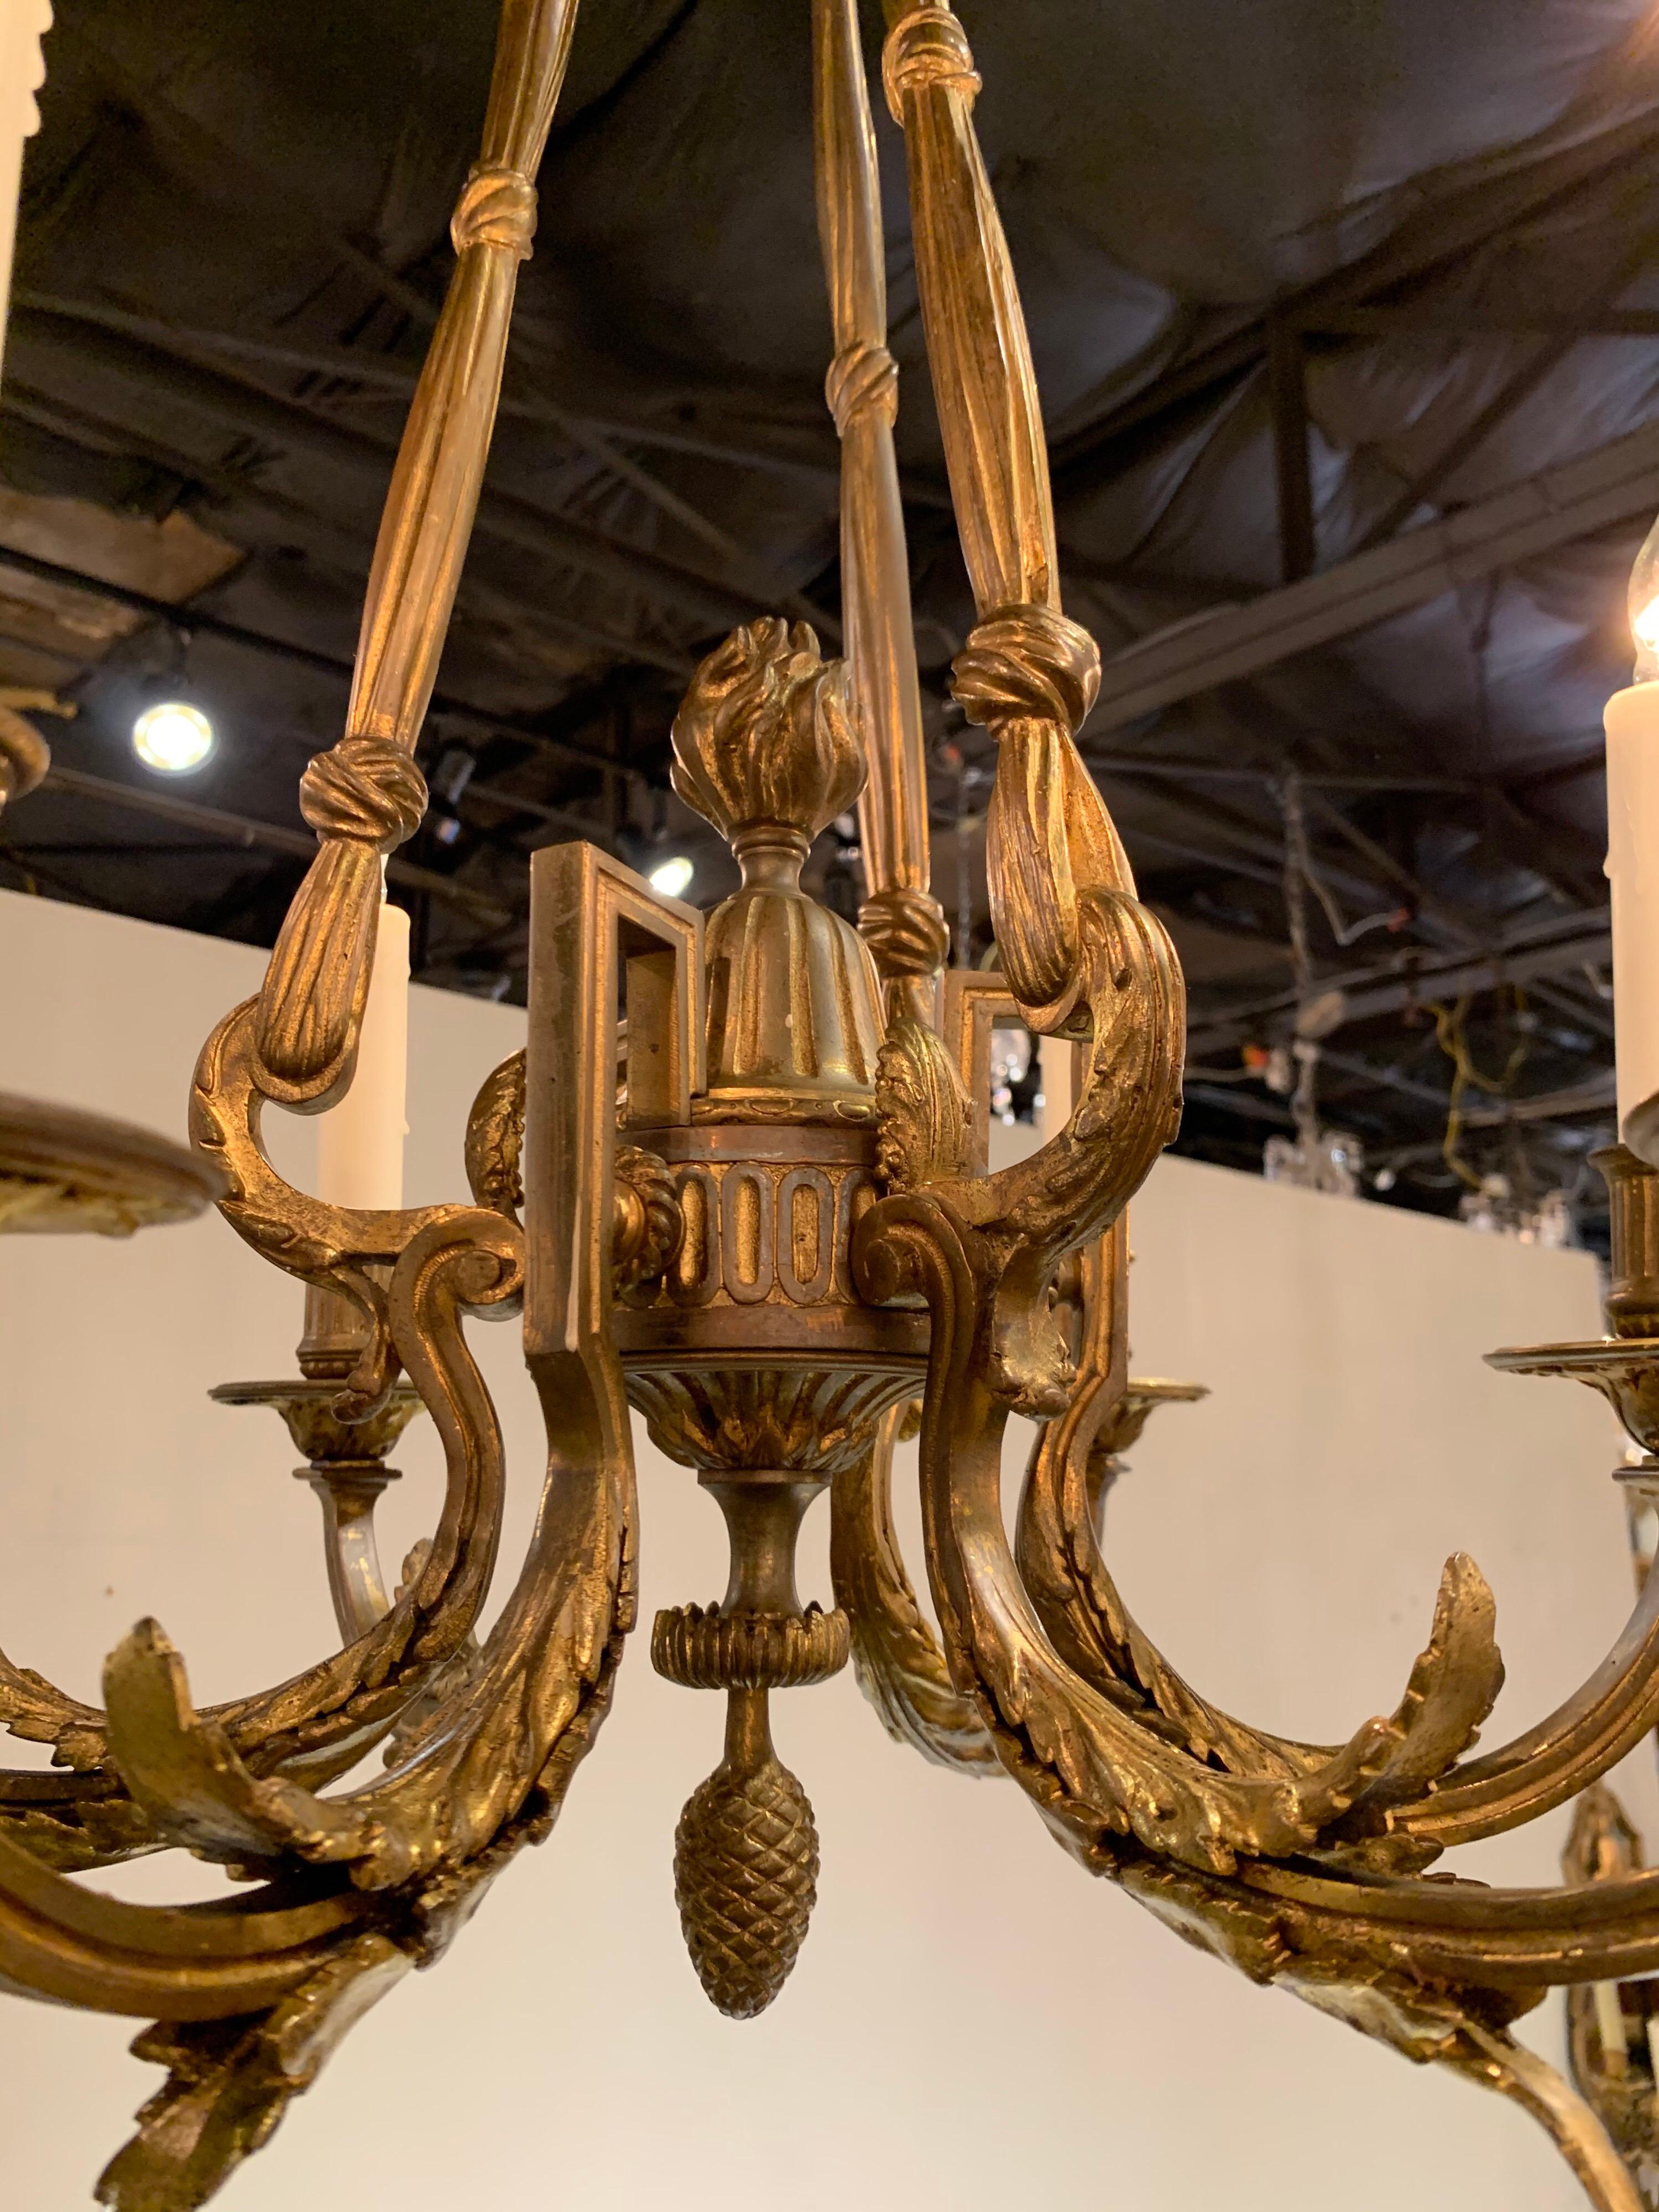 Very fine 19th century French Louis XVI style bronze chandelier with 6 lights. The arms of the chandelier are adorned with beautiful leaf patterns and there is also a pretty finial along with other decorative details. Makes an impressive statement!